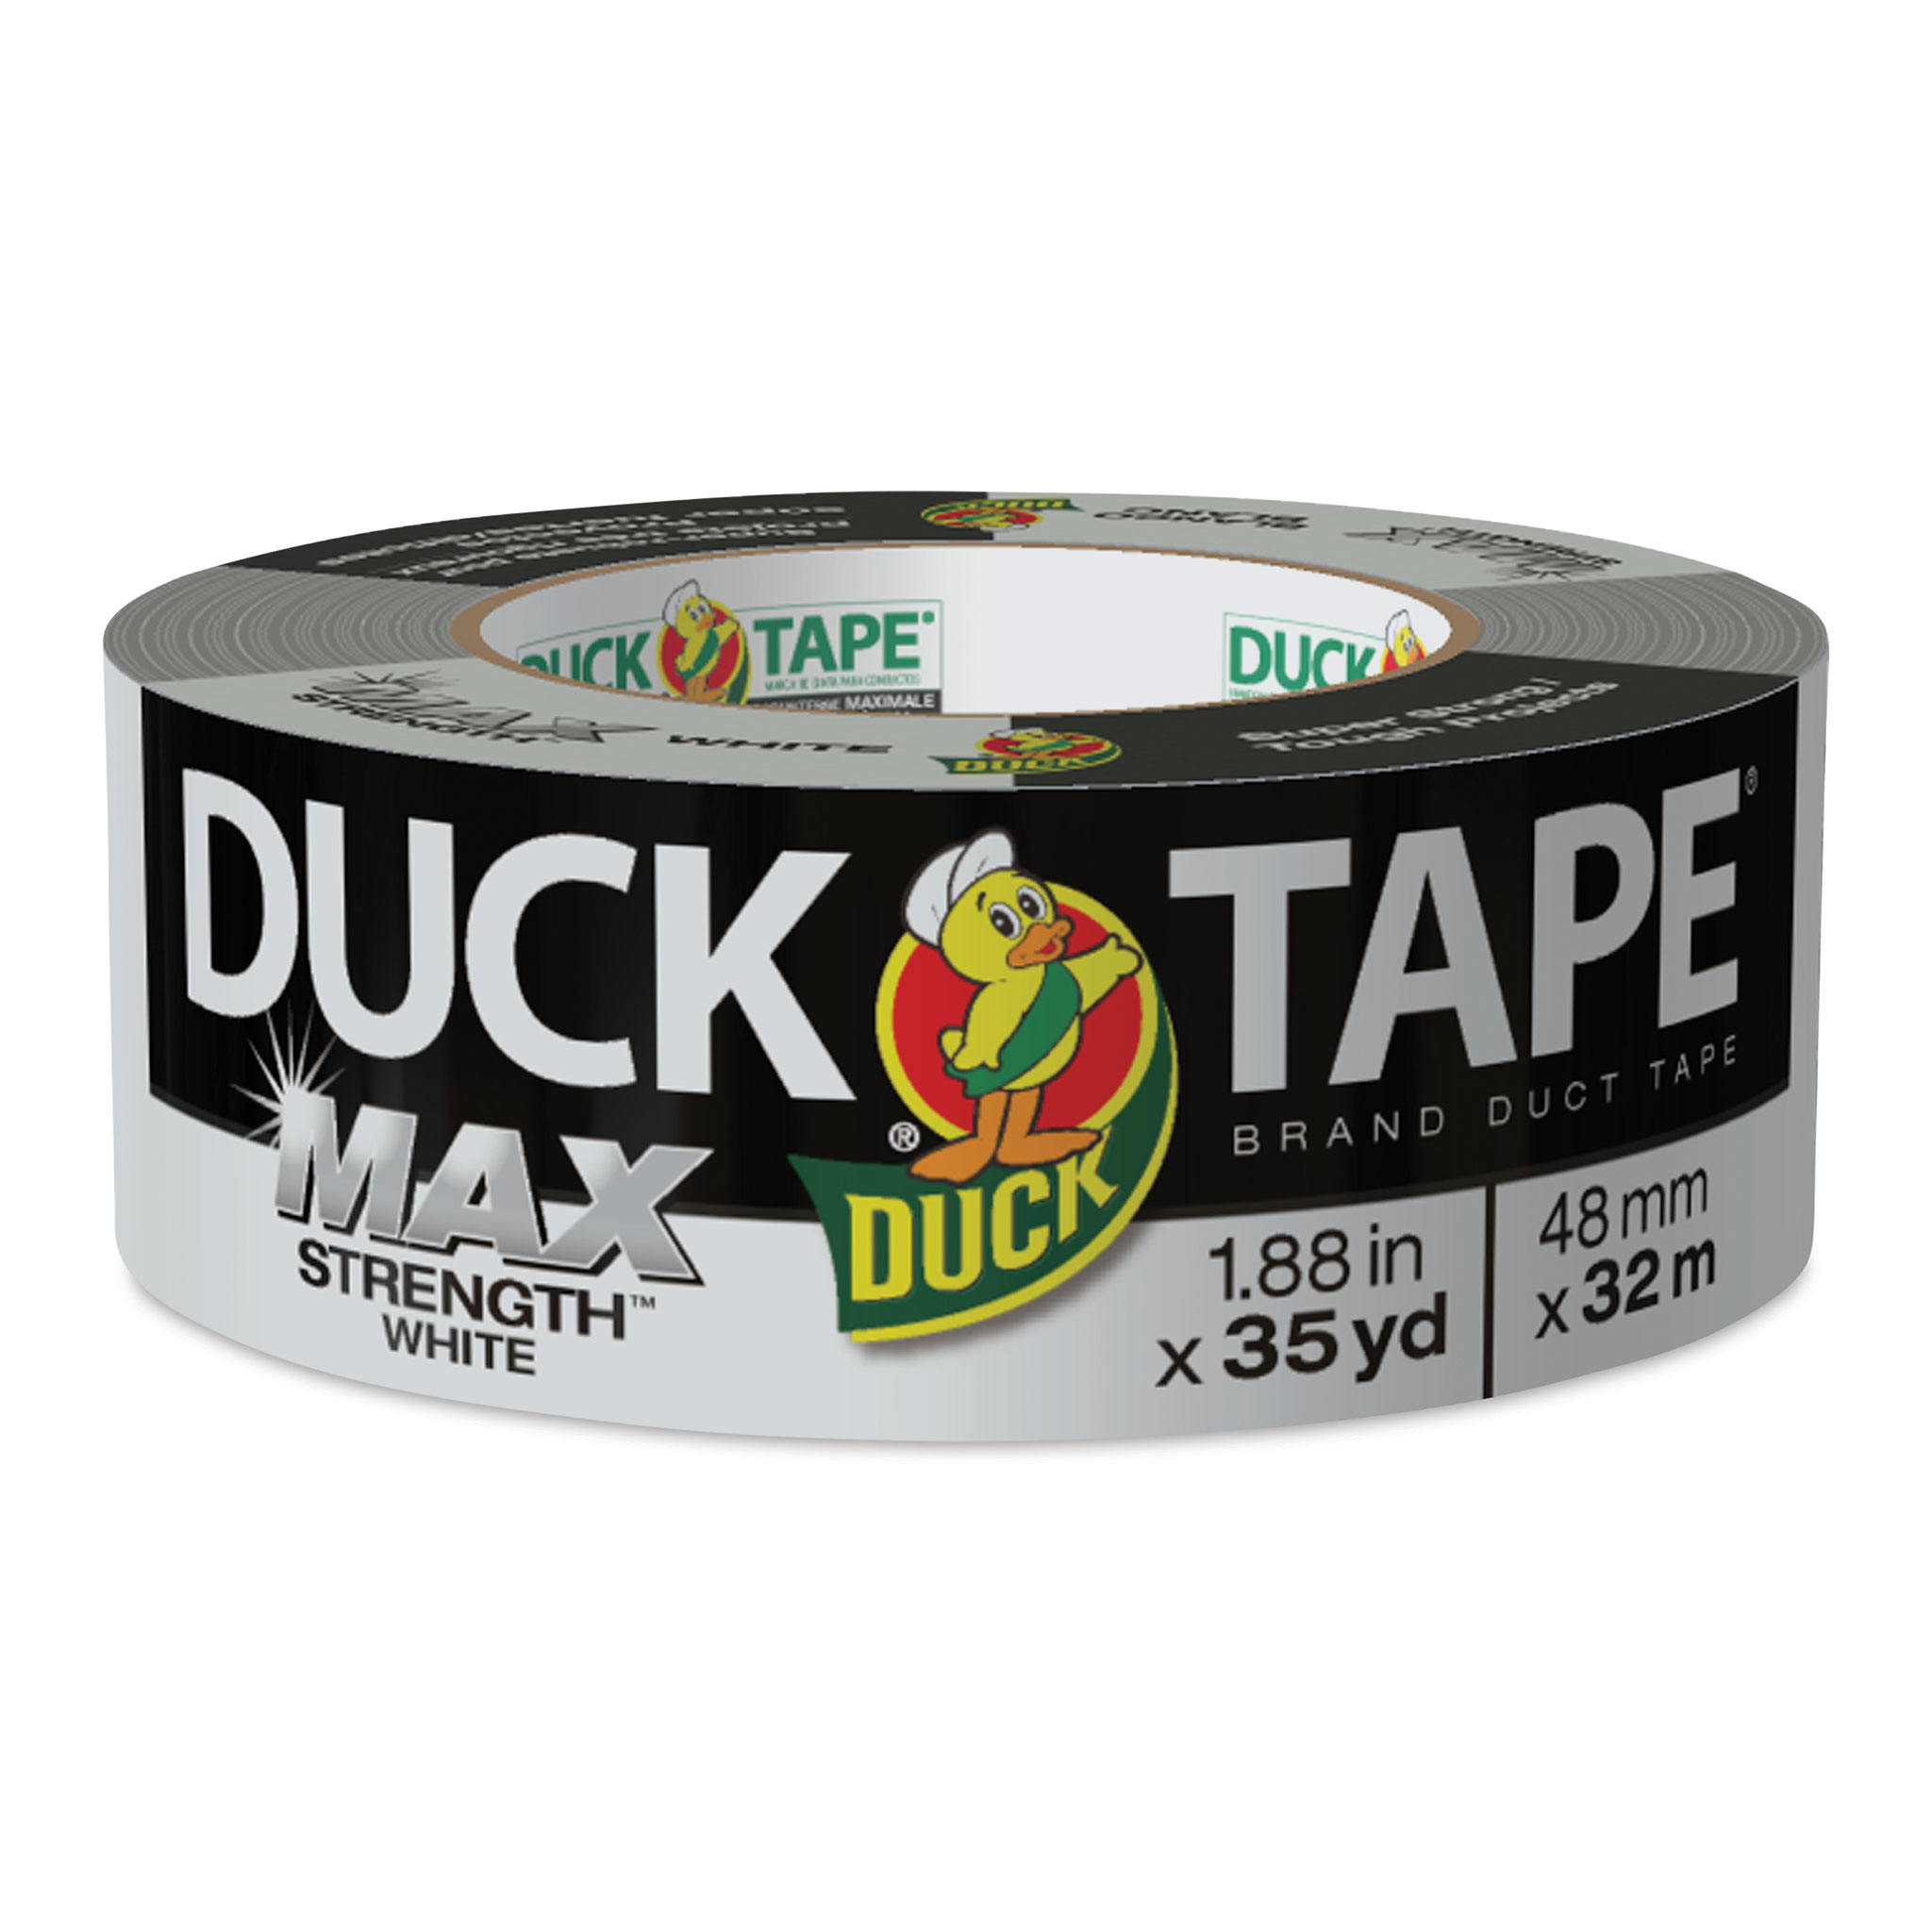 Duck Tape Colored Duct Tape